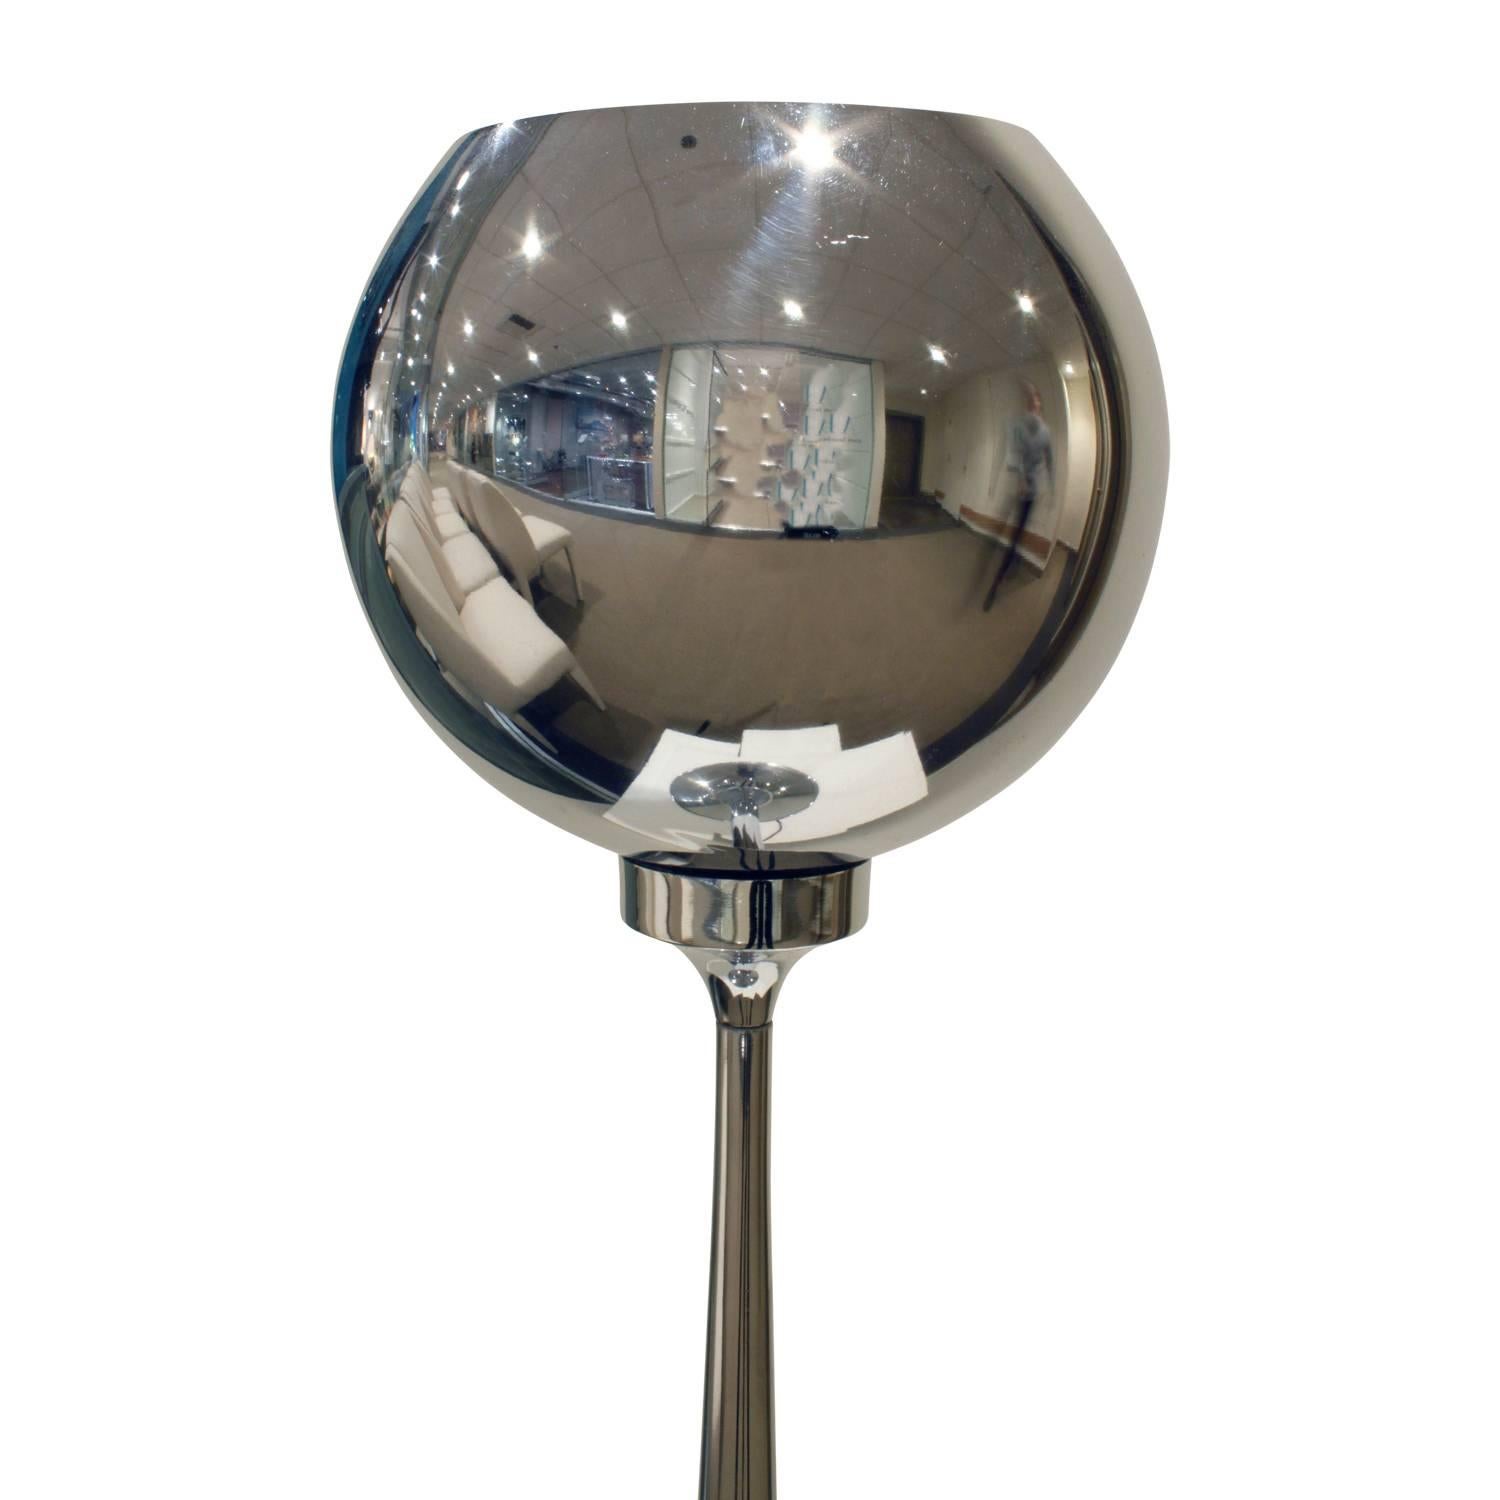 Hand-Crafted Pair of Chrome Table Lamps with Magnetized Spheres, 1960s For Sale